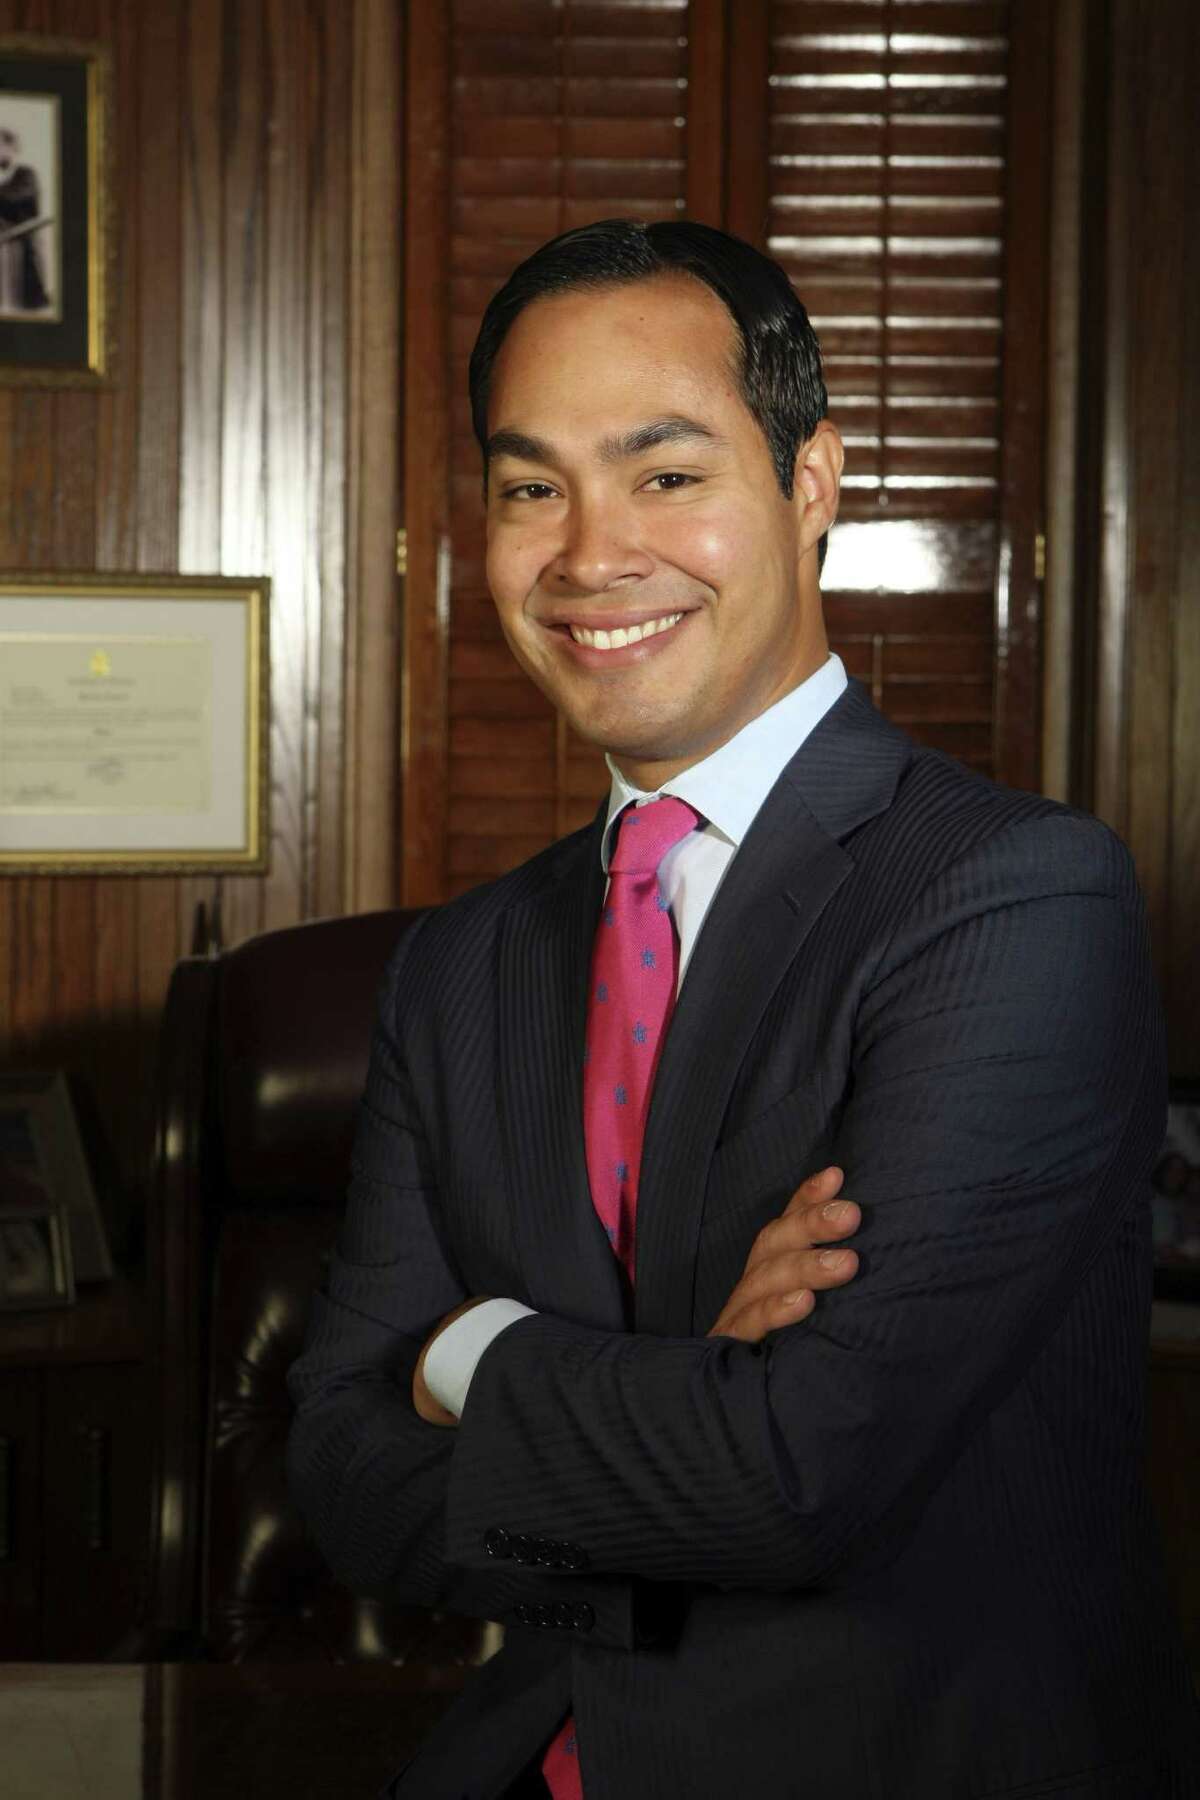 San Antonio Mayor Julian Castro is confident that the San Antonio Spurs will be able to avenge their loss in the finals last year and claim their fifth NBA title in franchise history